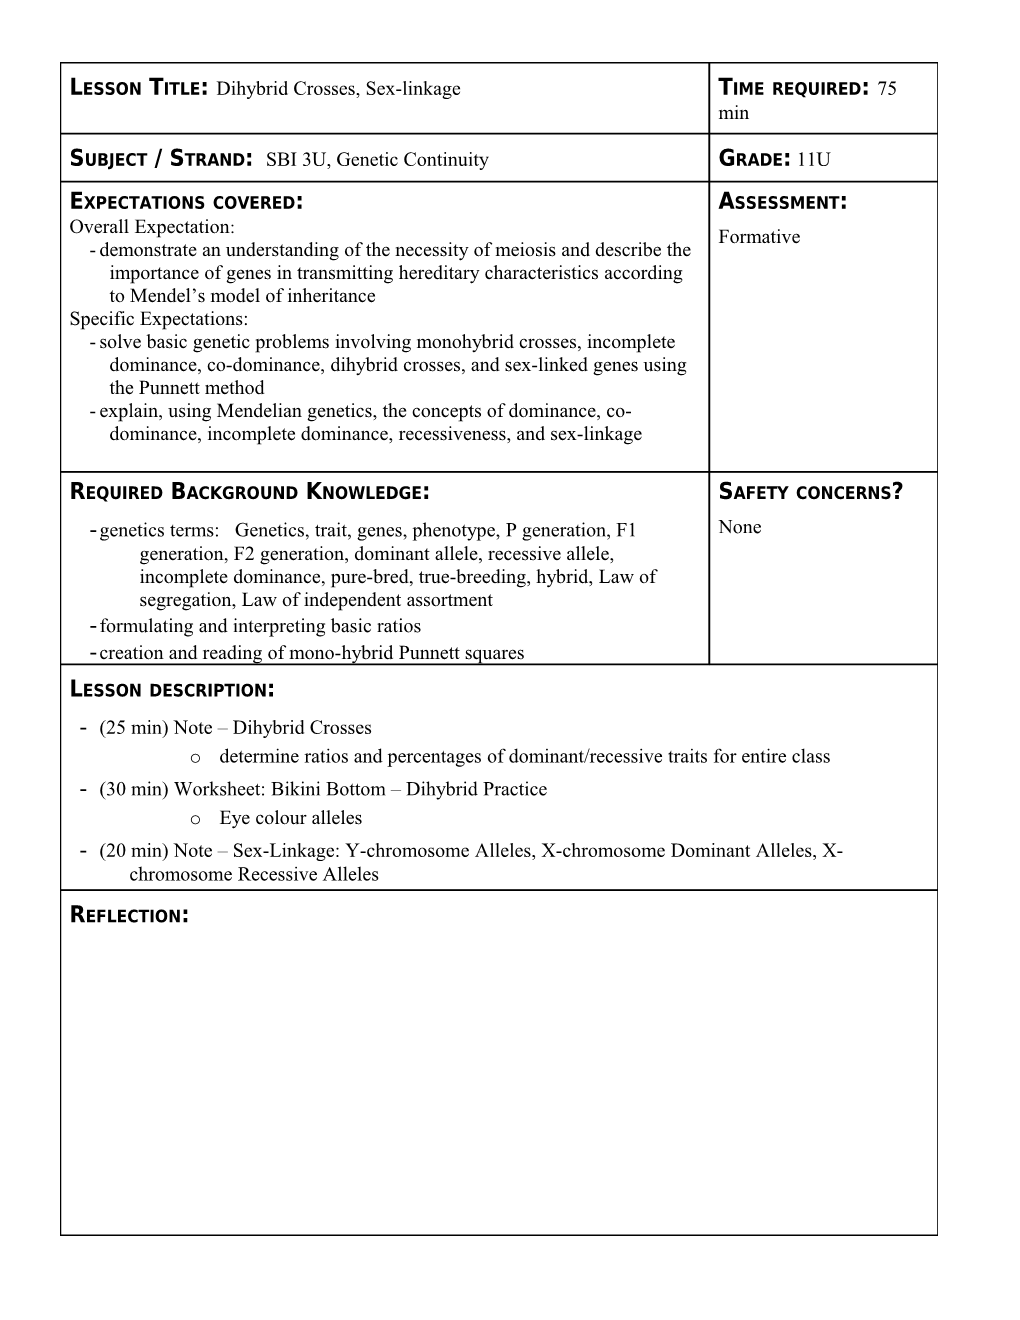 General Lesson Planning Format